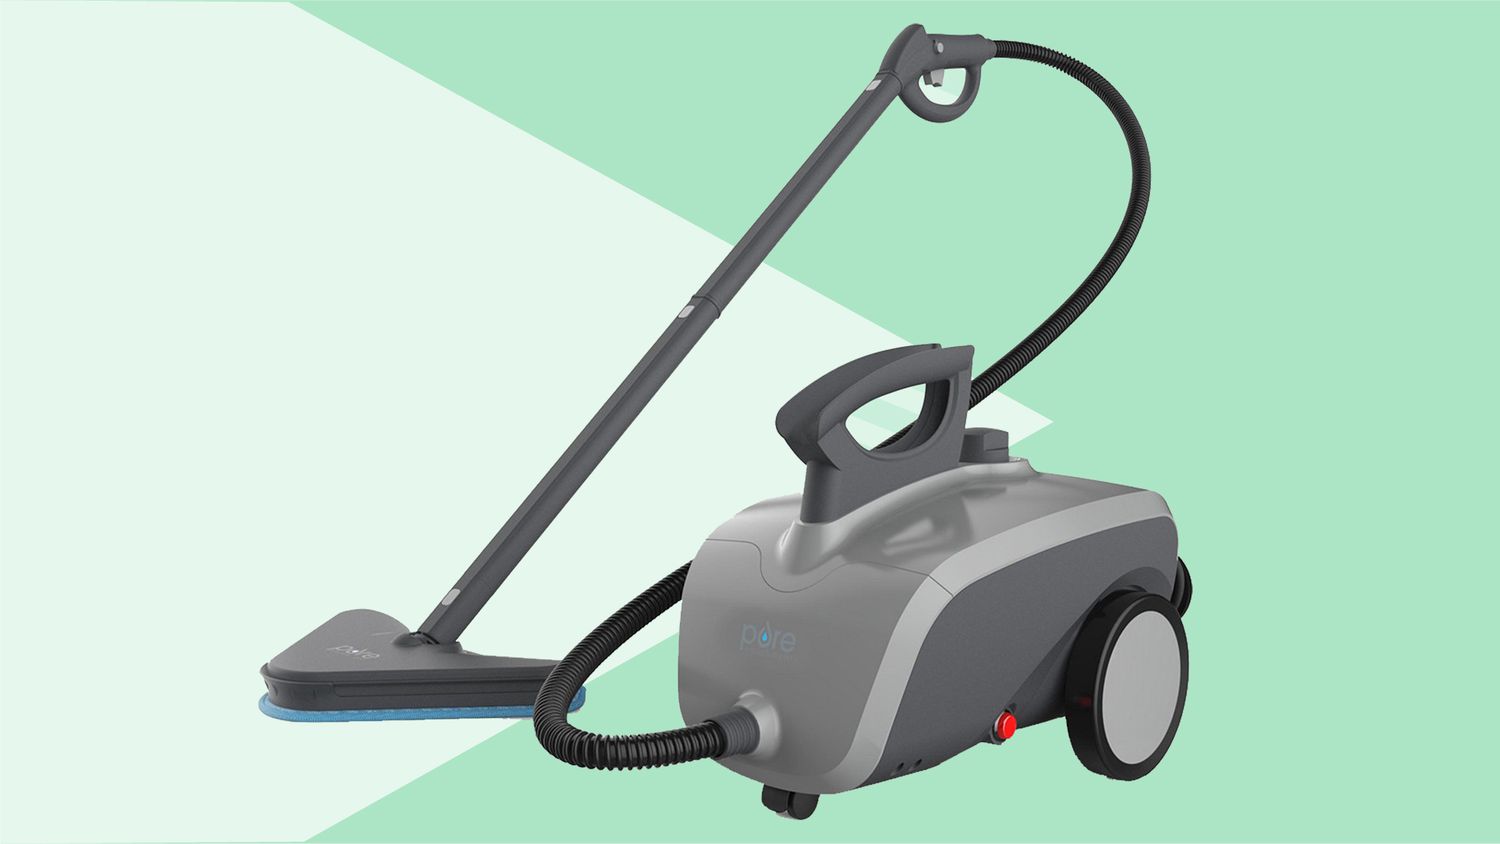 Steam Cleaners The 9 Best Steam Cleaners for 2021, According to Customers | Real Simple